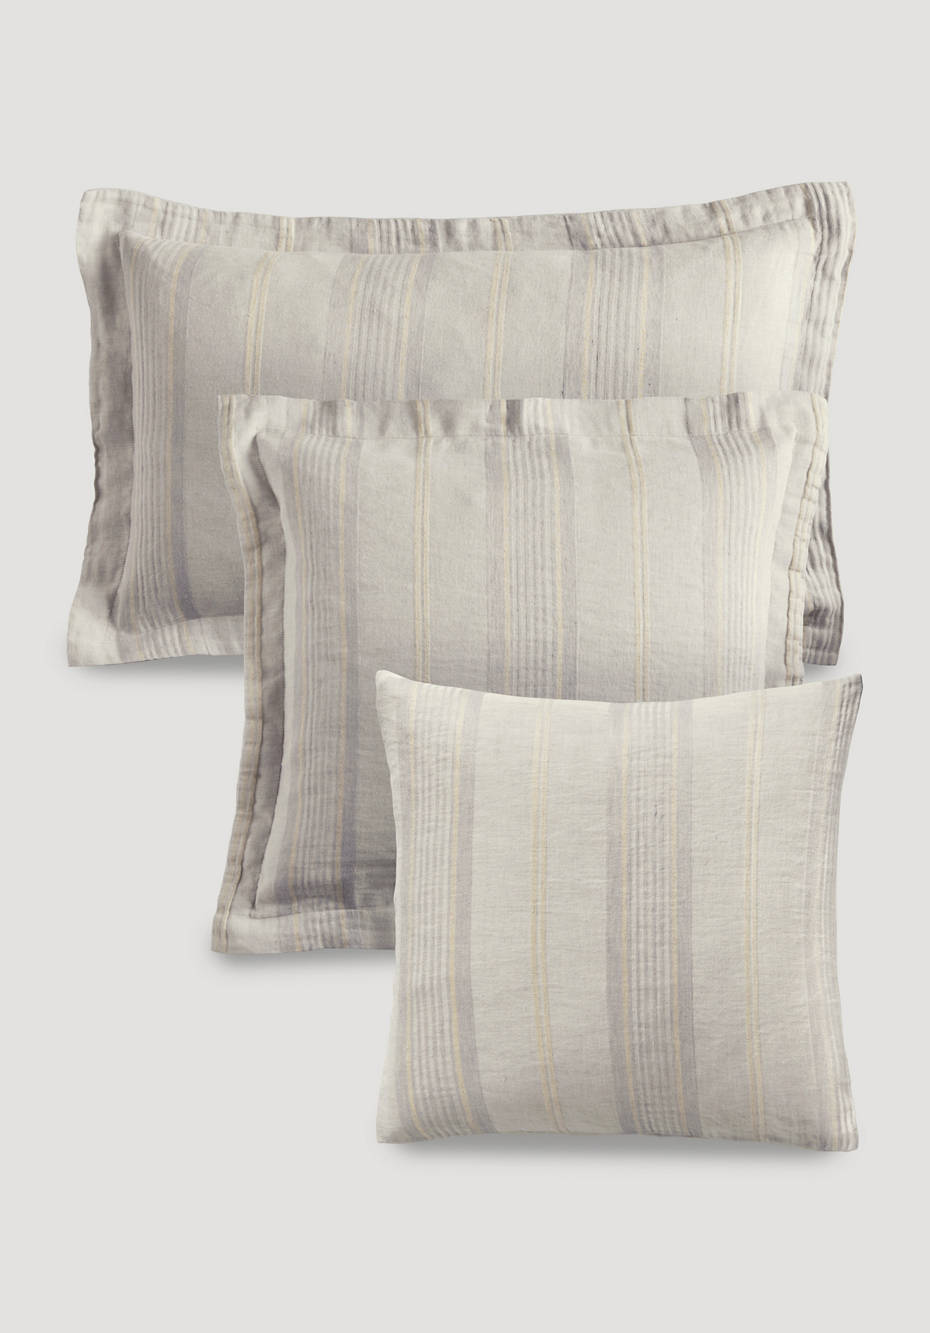 Limoges cushion cover made of organic linen with organic cotton